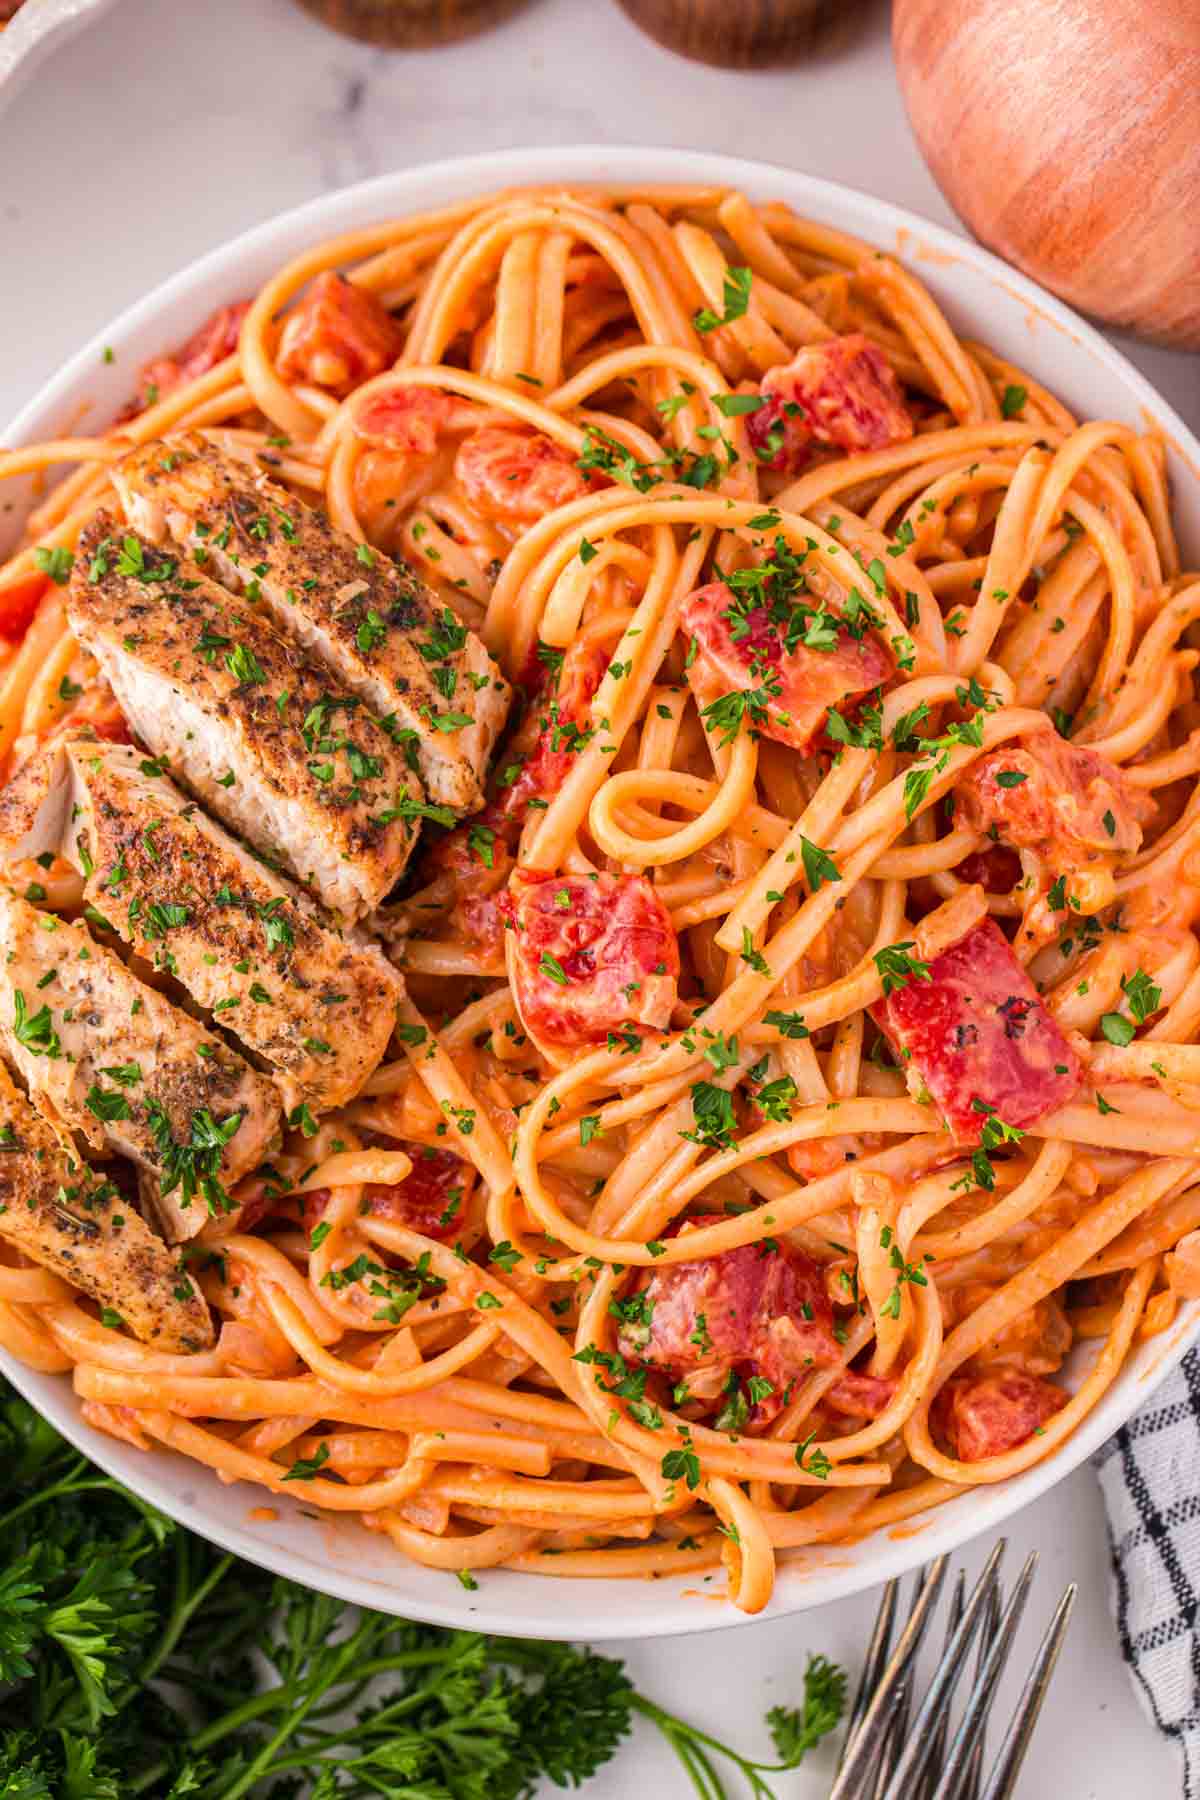 Spicy Chicken Pasta is a hearty dinner recipe loaded with strips of seasoned chicken breast, linguine, fire roasted tomatoes, chili flakes and heavy cream.